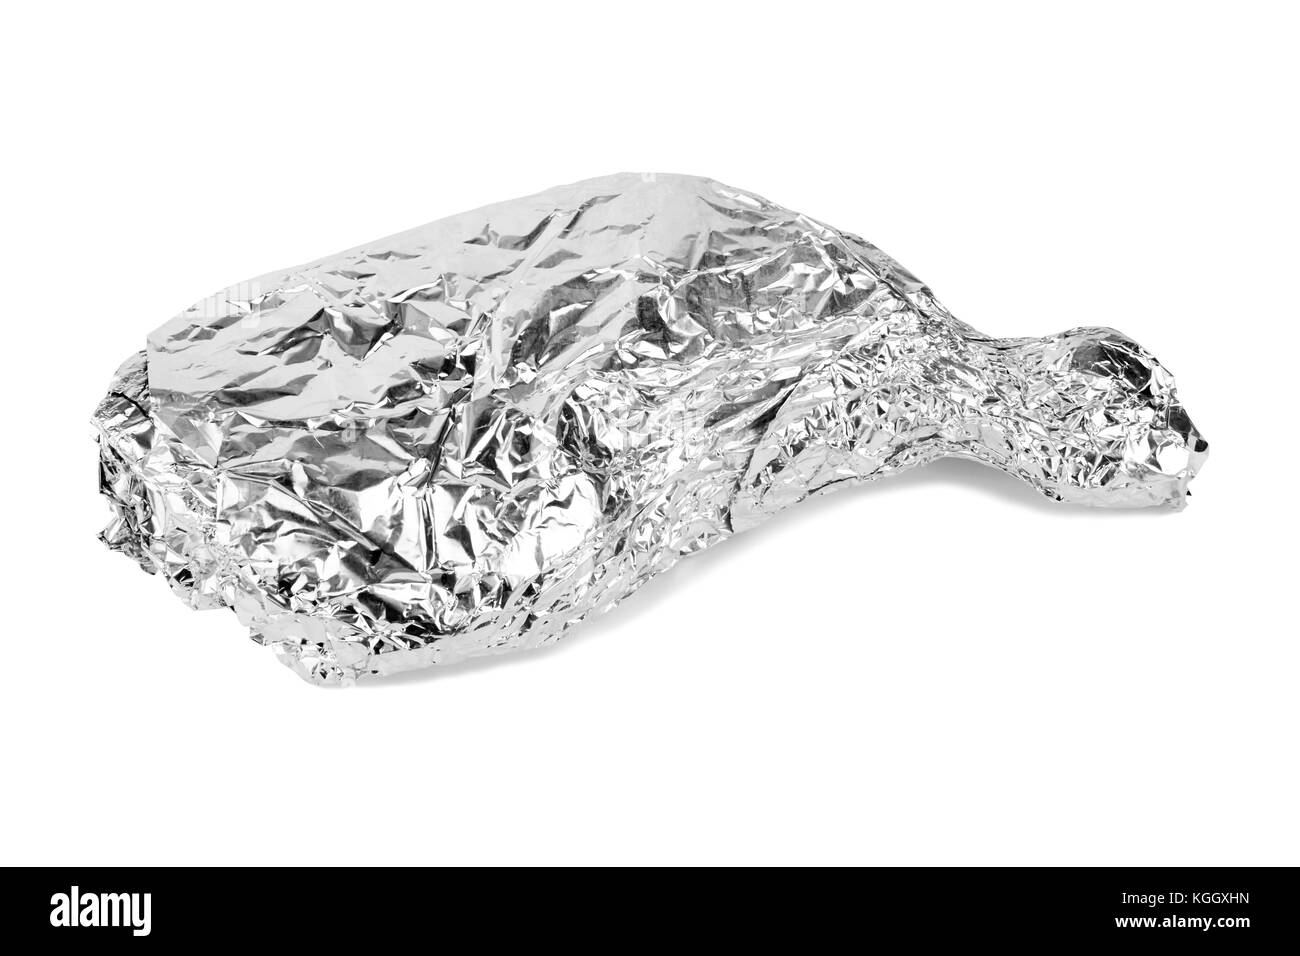 Frozen chicken leg wrapped in aluminum foil isolated on white. Stock Photo